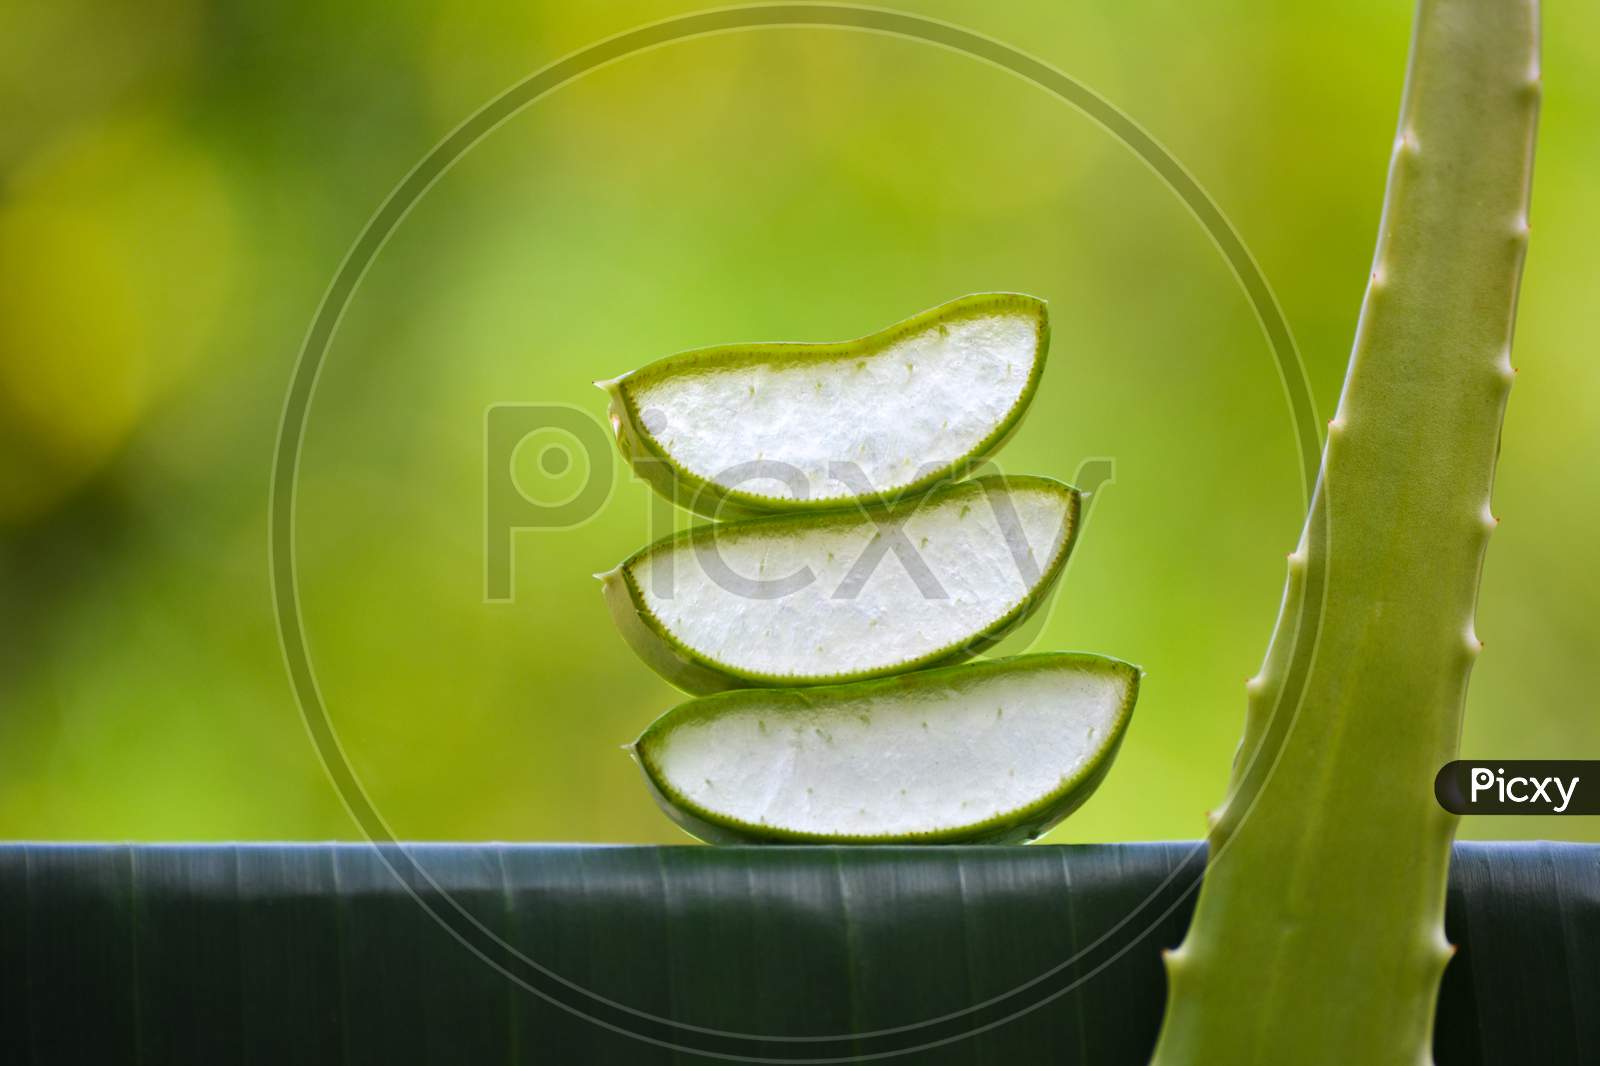 Fresh Aloe vera slices on natural background. Aloe Vera is a very useful herbal medicine for skin care and hair care.